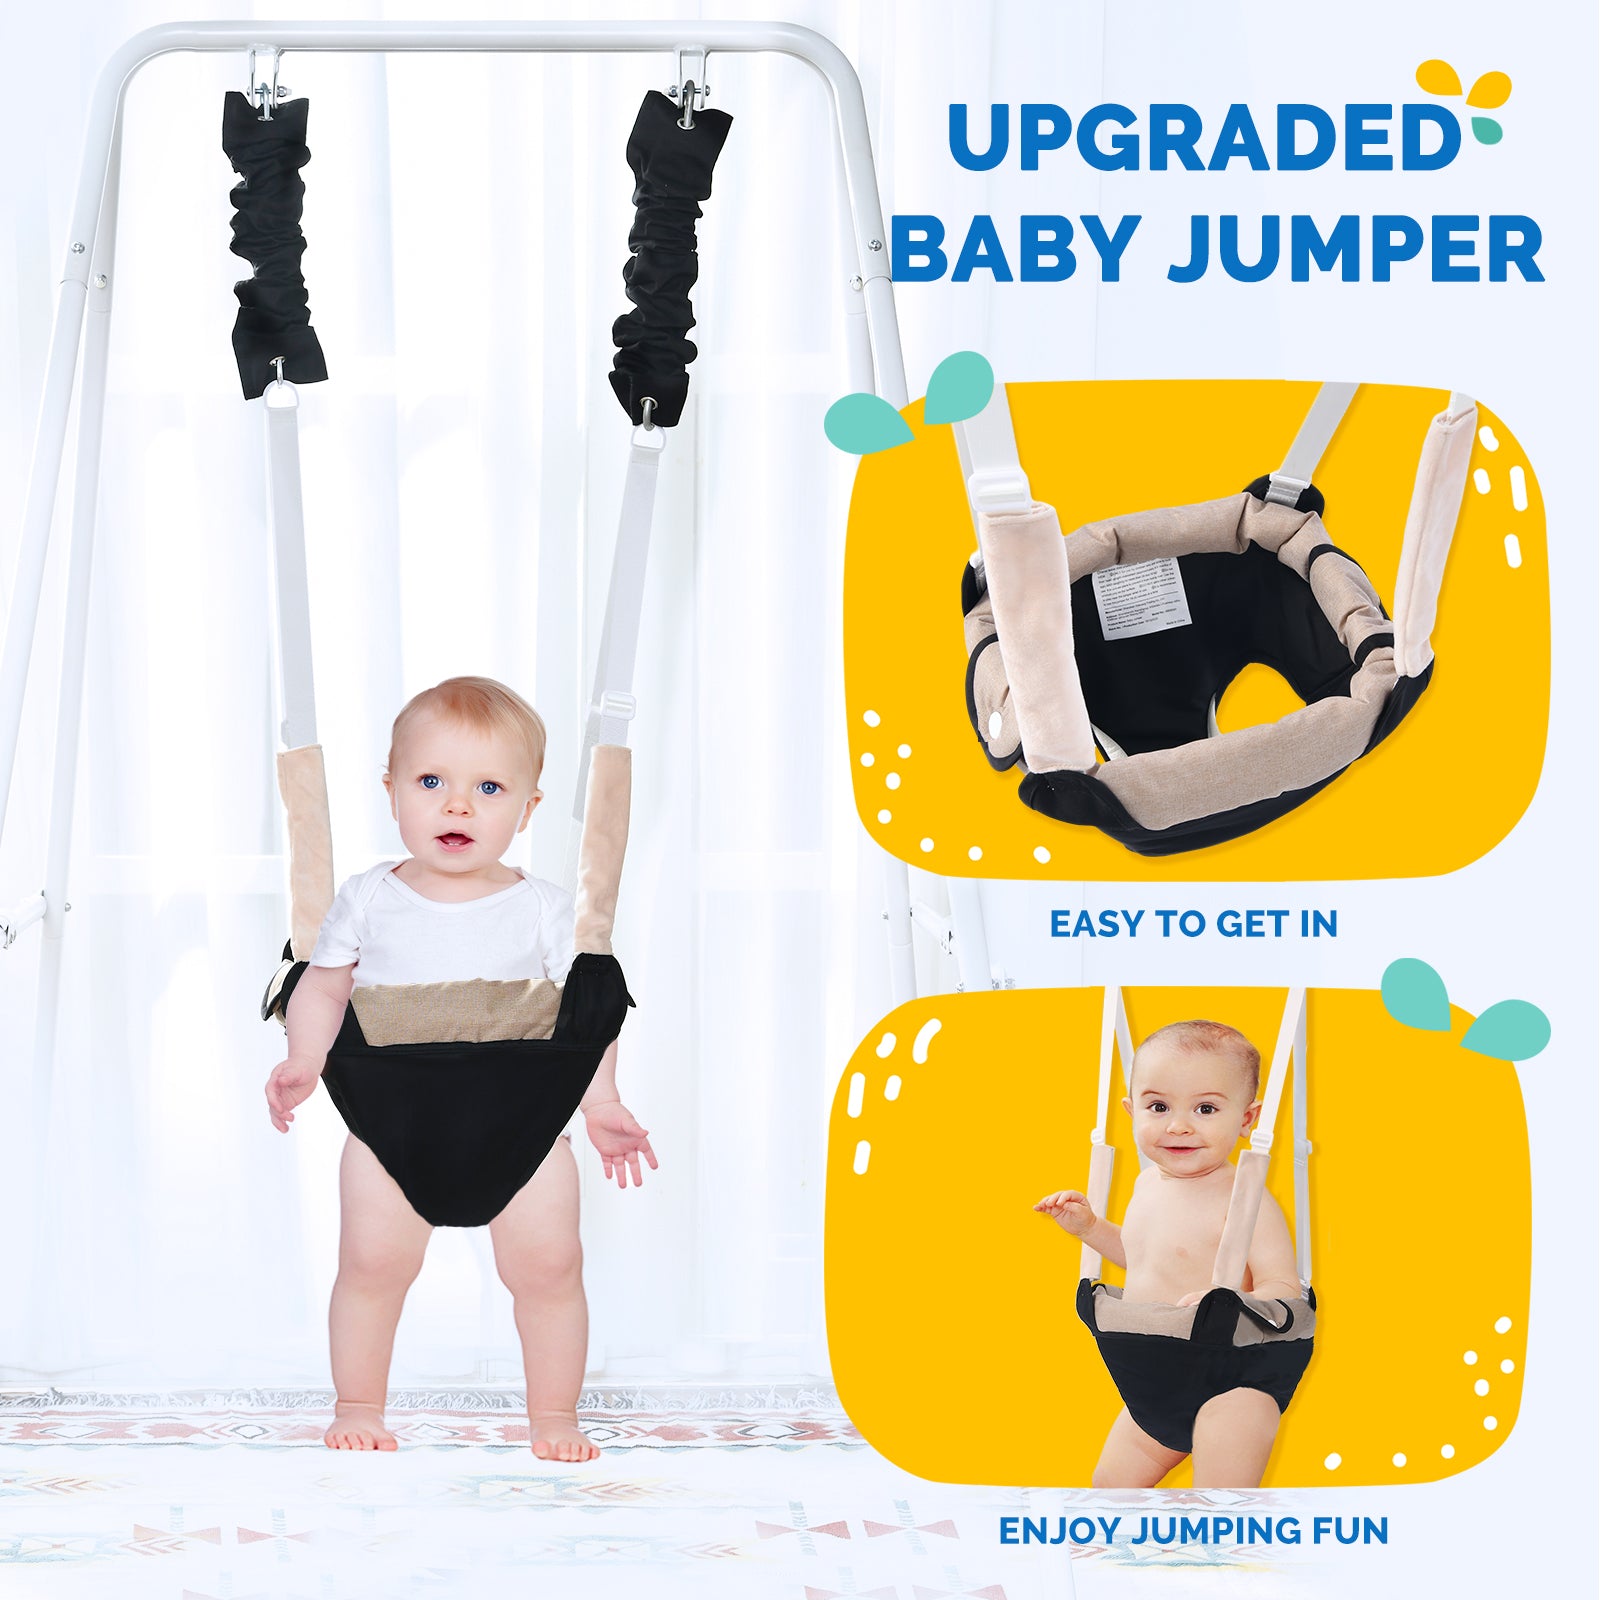 Upgraded Baby Jumper with Foldable Stand, Infant Jumper for Indoor Outdoor Play